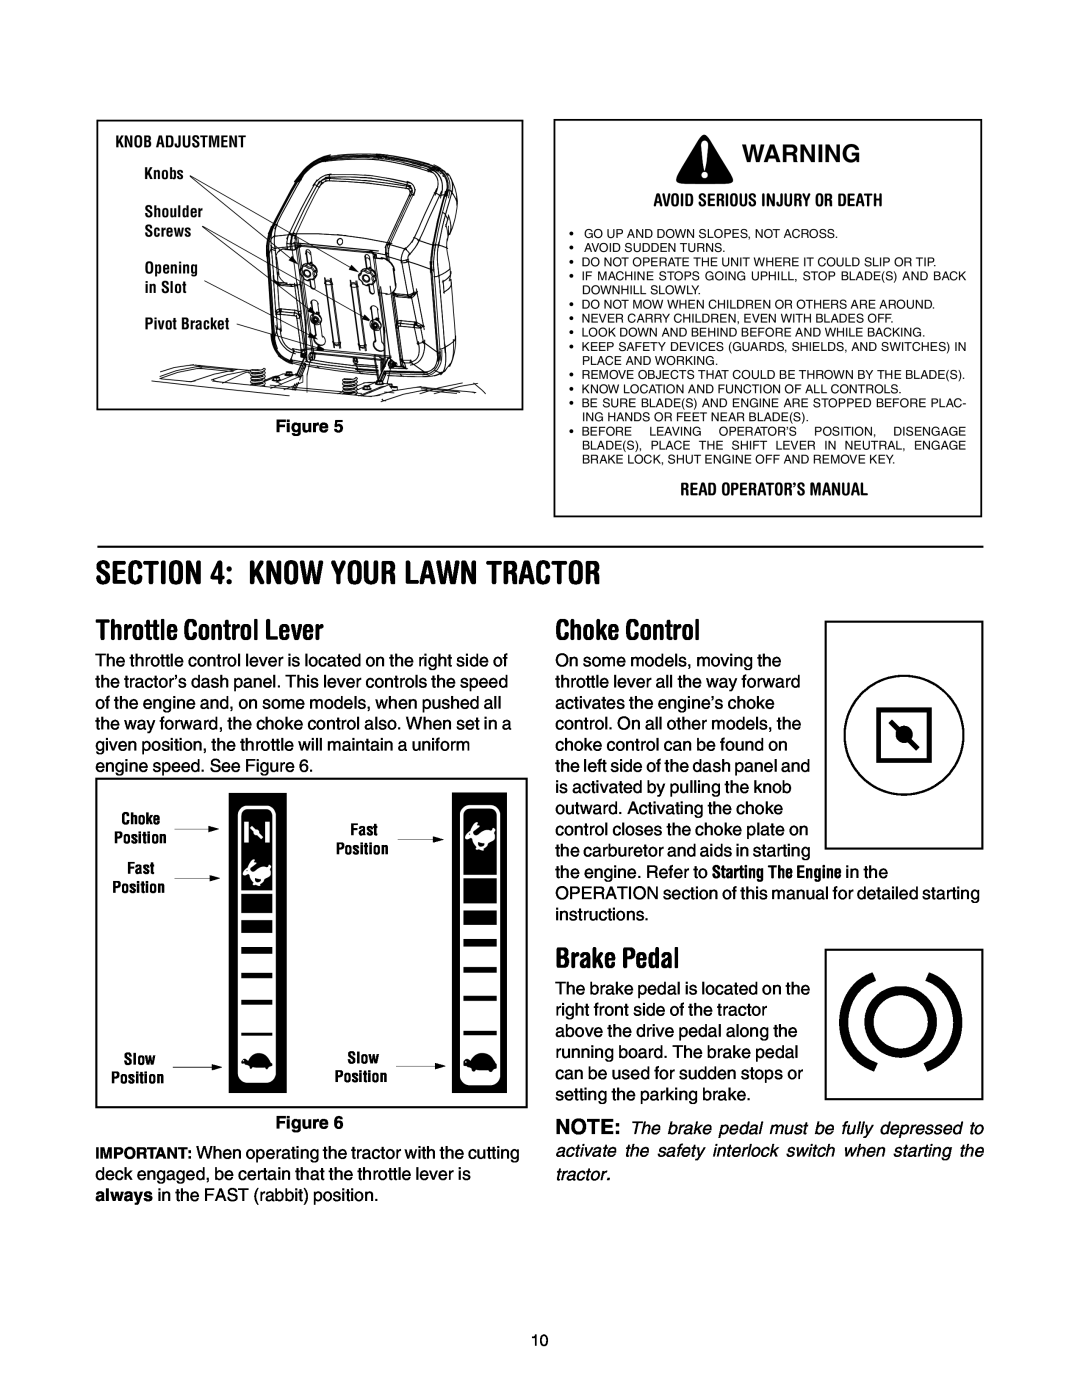 Troy-Bilt Automatic Lawn Tractor manual Know Your Lawn Tractor, Throttle Control Lever, Choke Control, Brake Pedal 